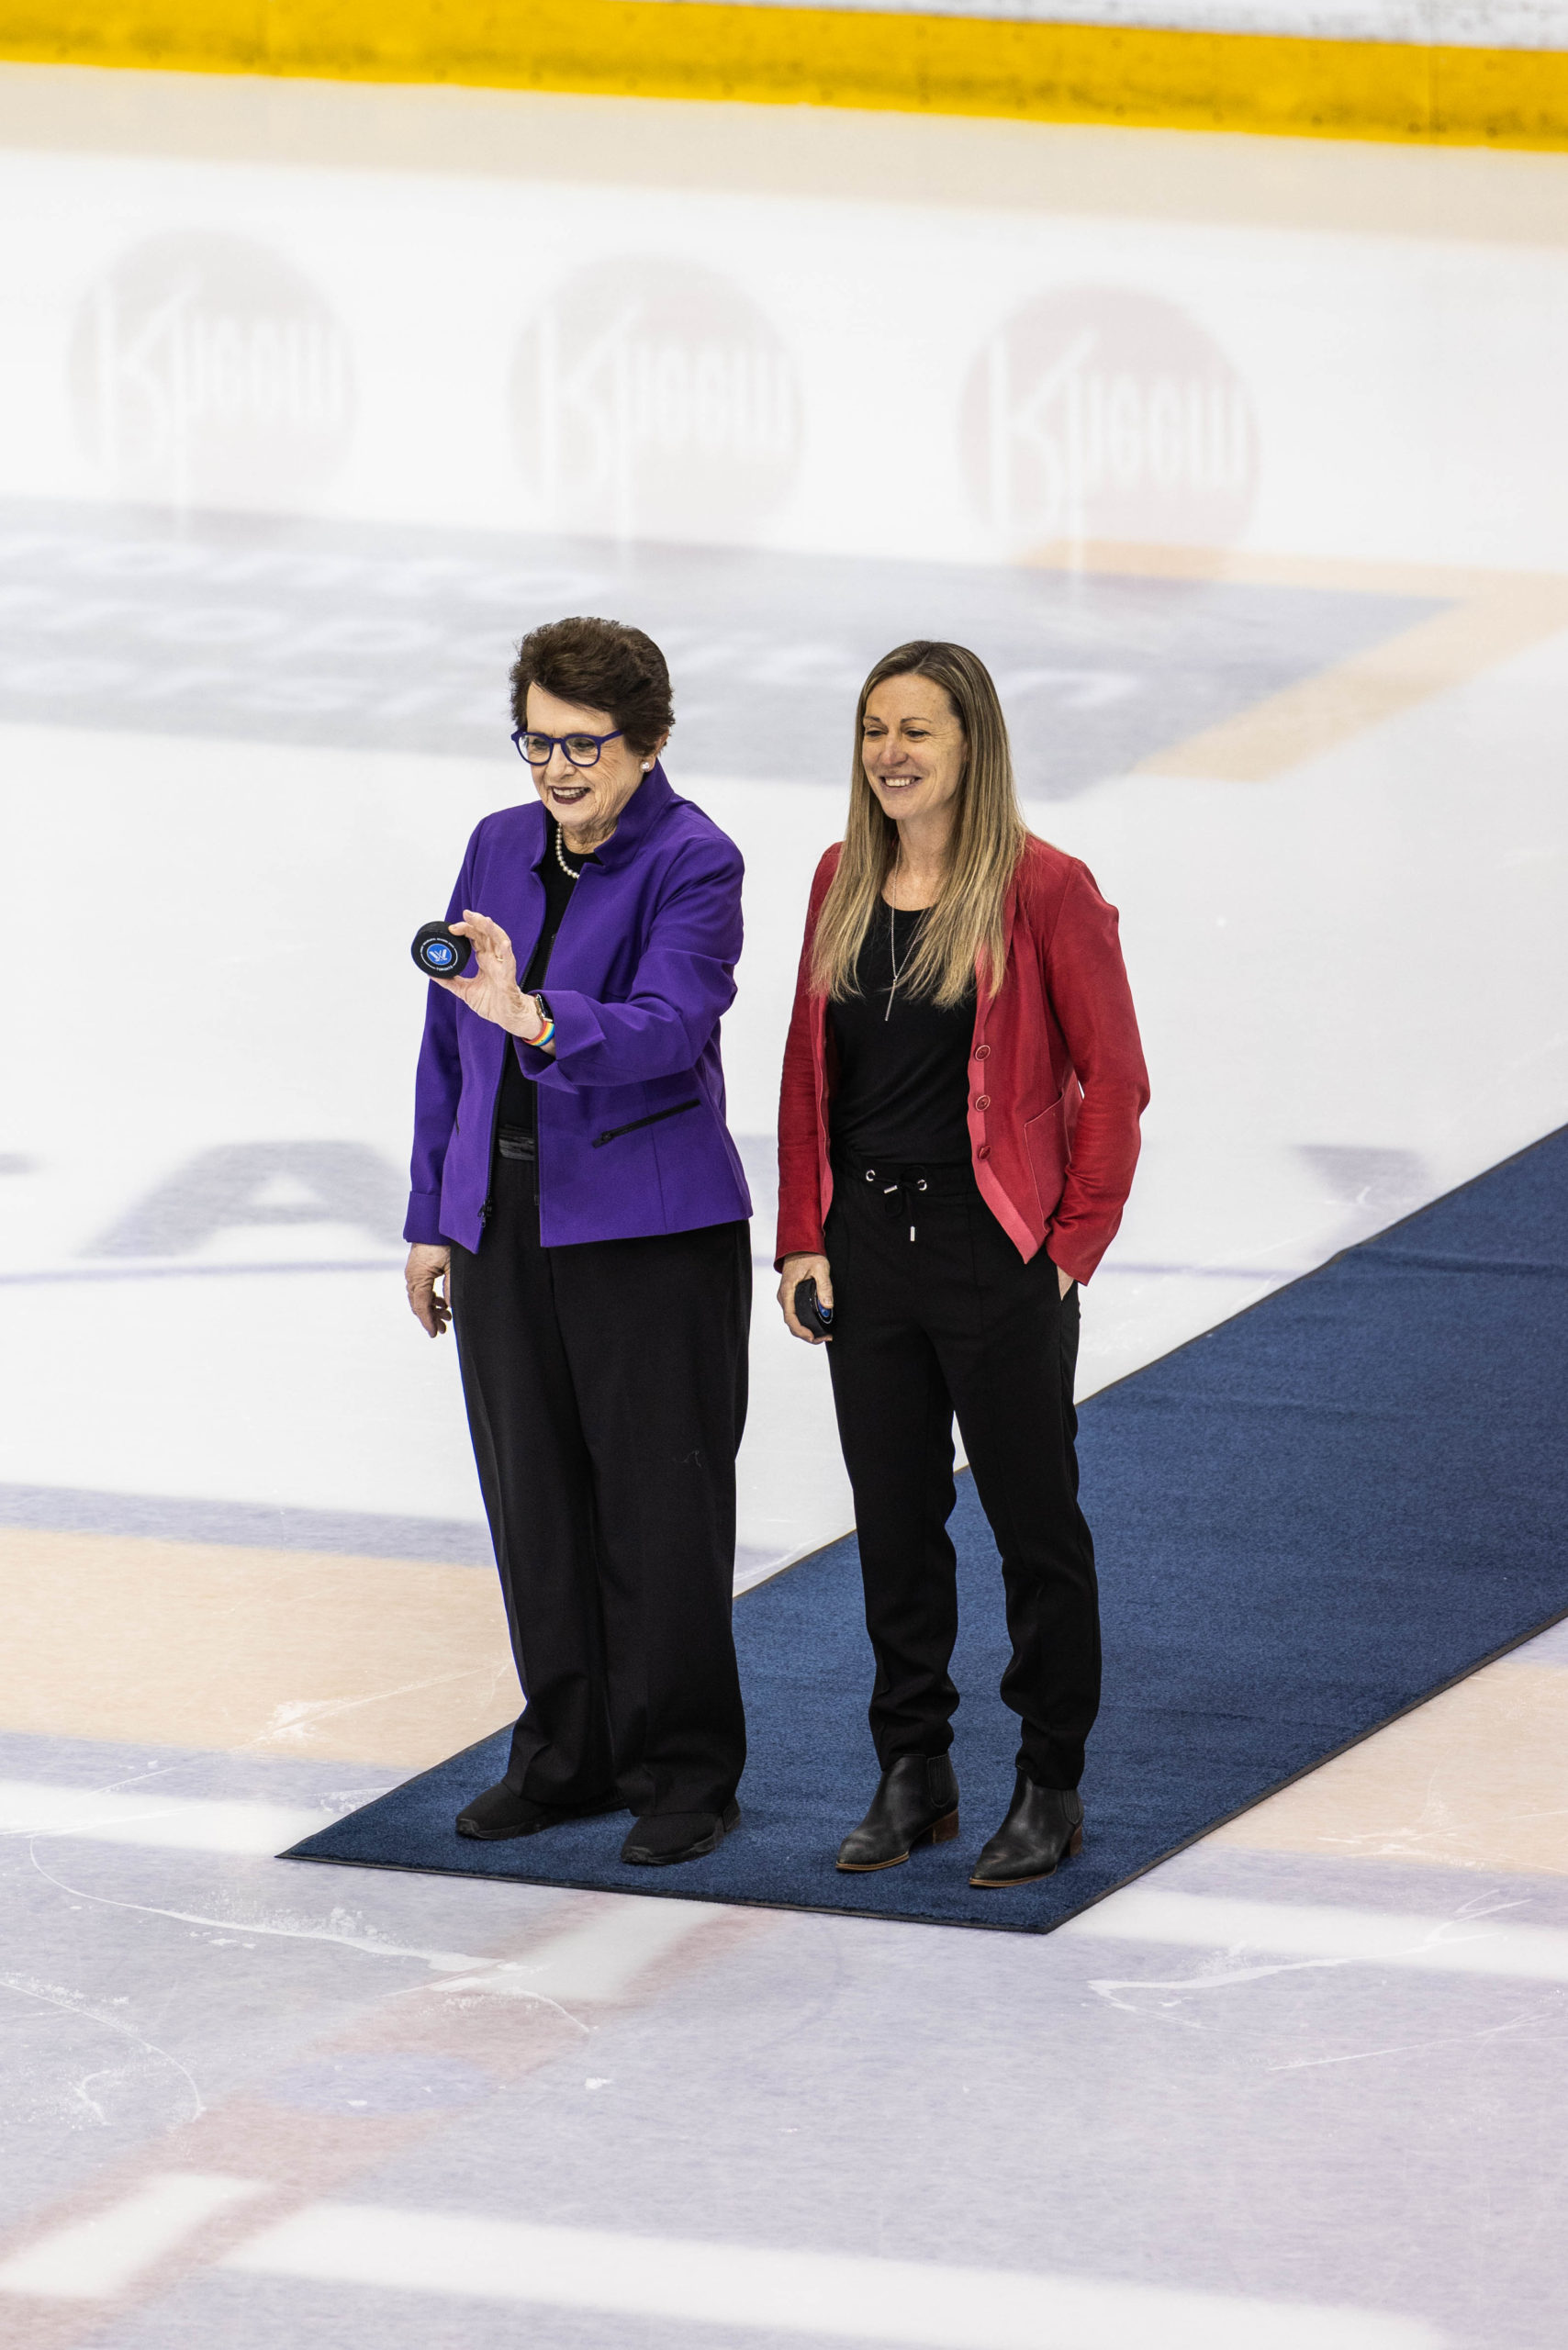 Billie Jean King and Jayna Hefford prepare to drop the puck at the ceremonial face-off